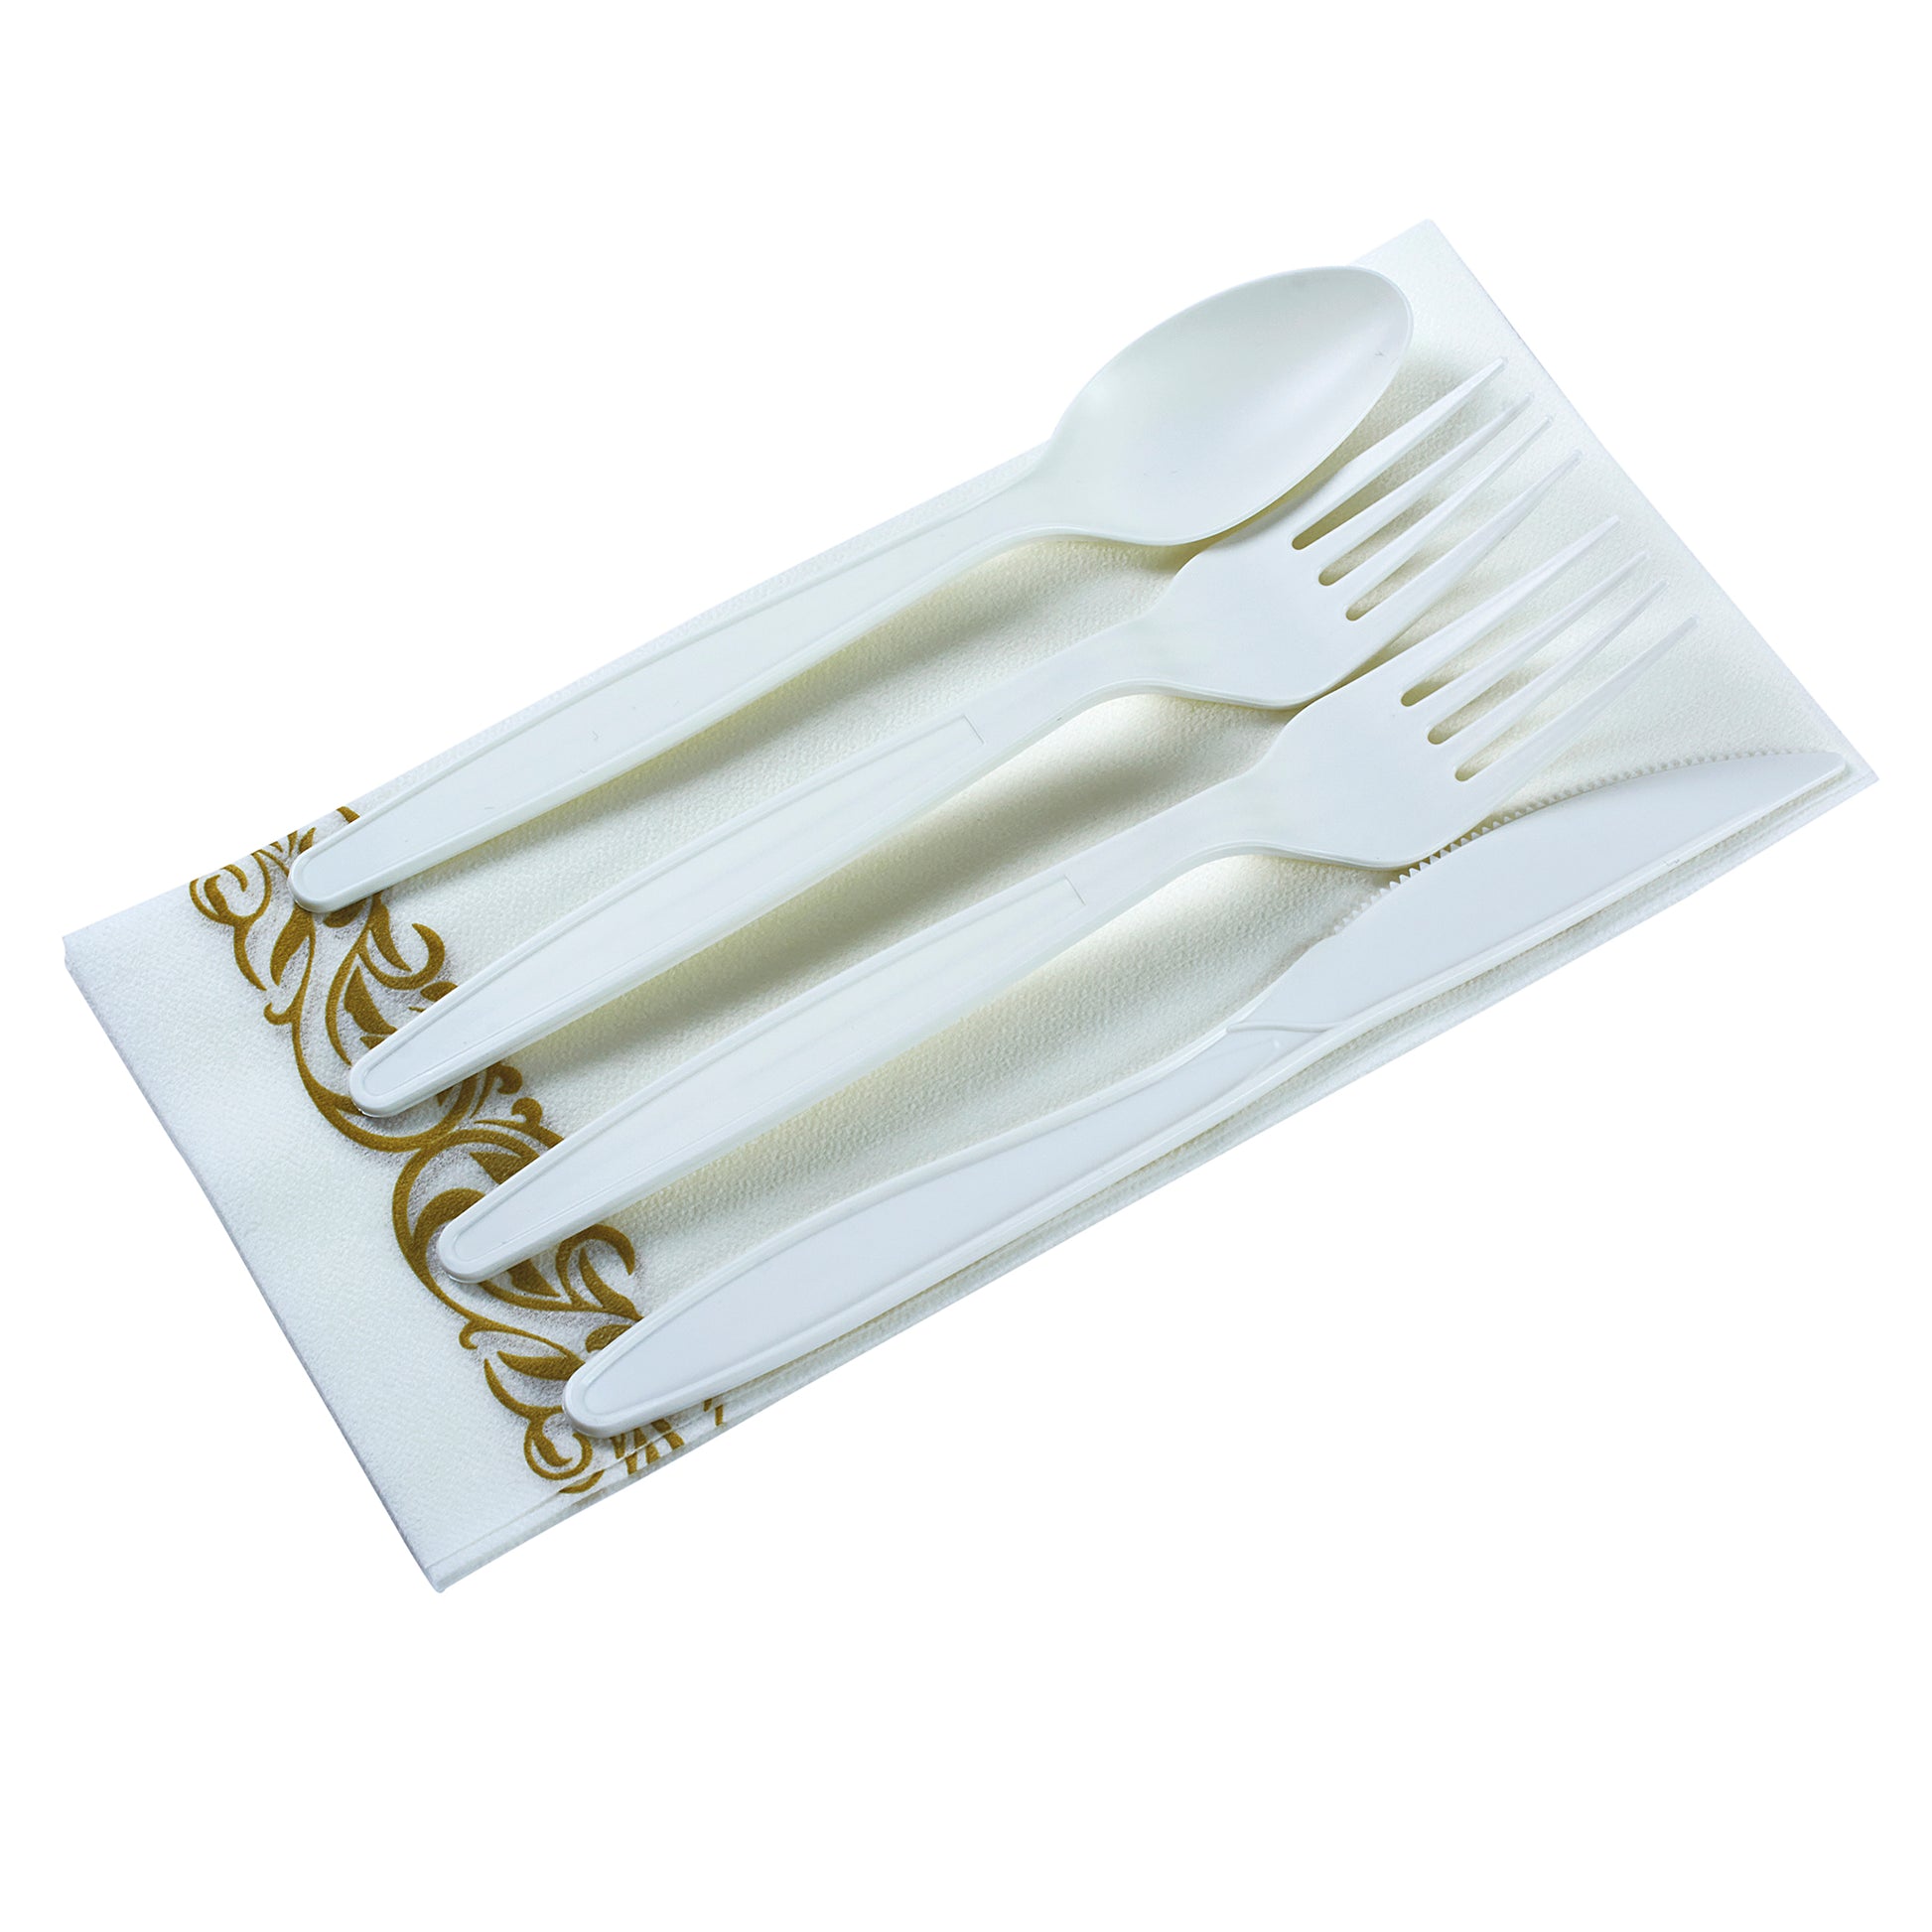 4C Flatware Compostable Cutlery Set - 200 PC Plant Based Utensils:  [75-50-25-50] Compostable Forks Spoons Knives Straws, Non-Plastic  Silverware To Go